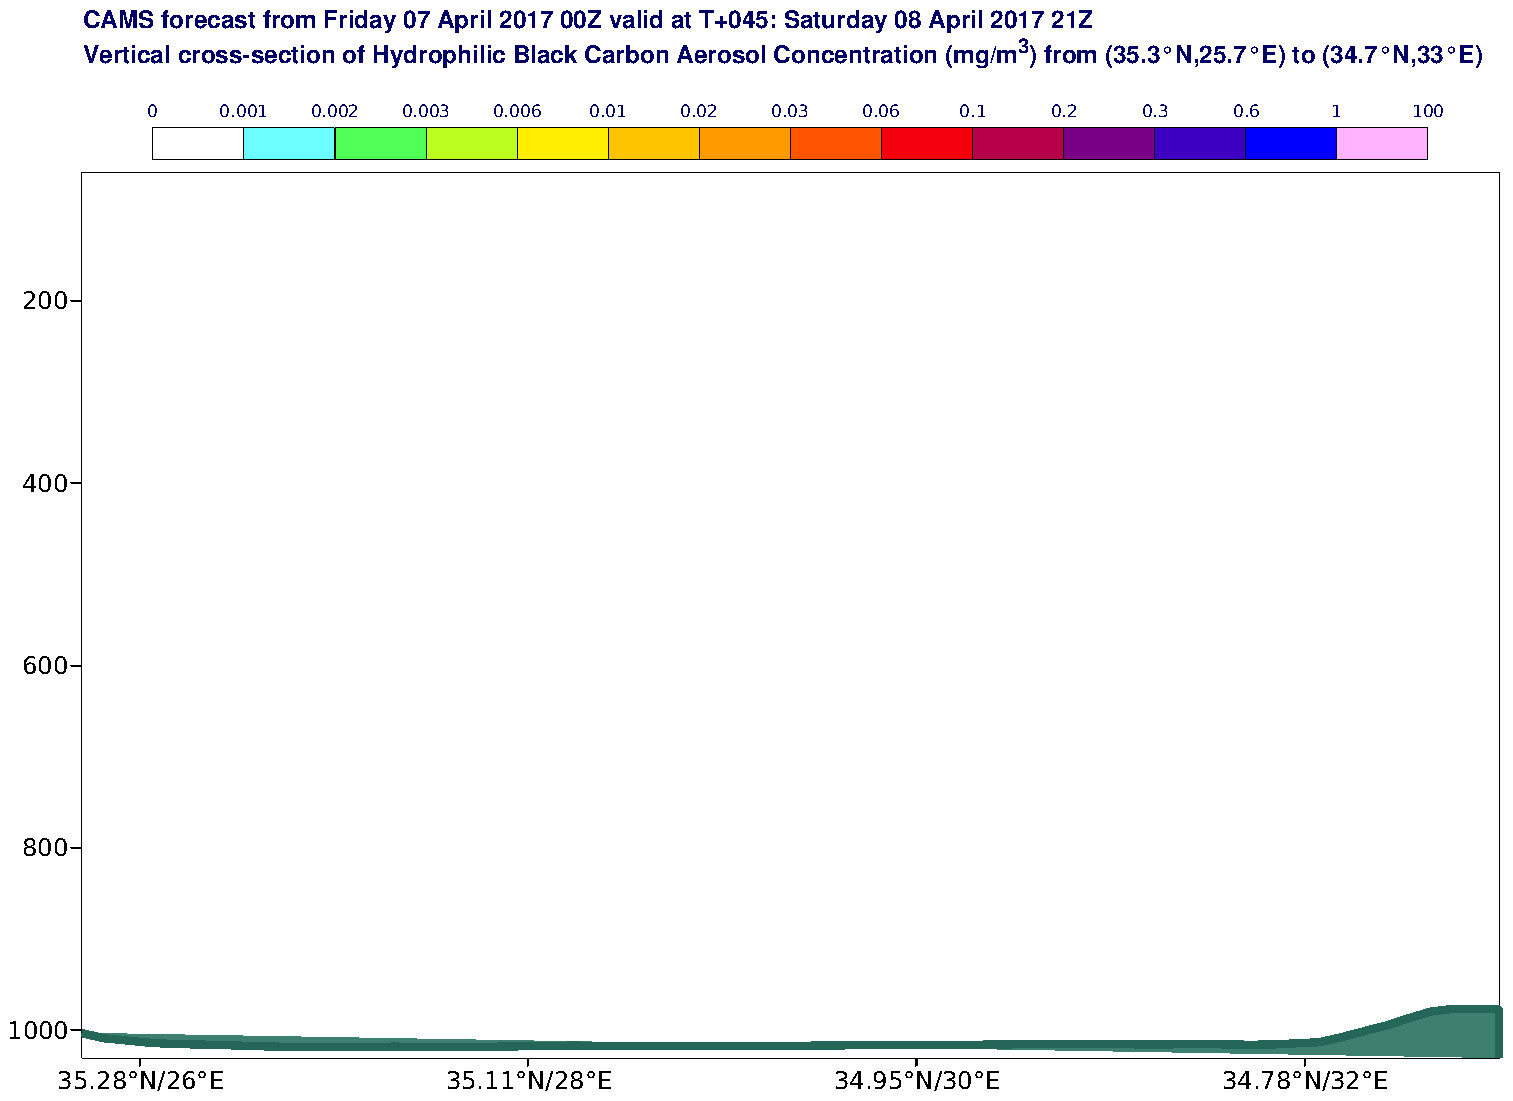 Vertical cross-section of Hydrophilic Black Carbon Aerosol Concentration (mg/m3) valid at T45 - 2017-04-08 21:00